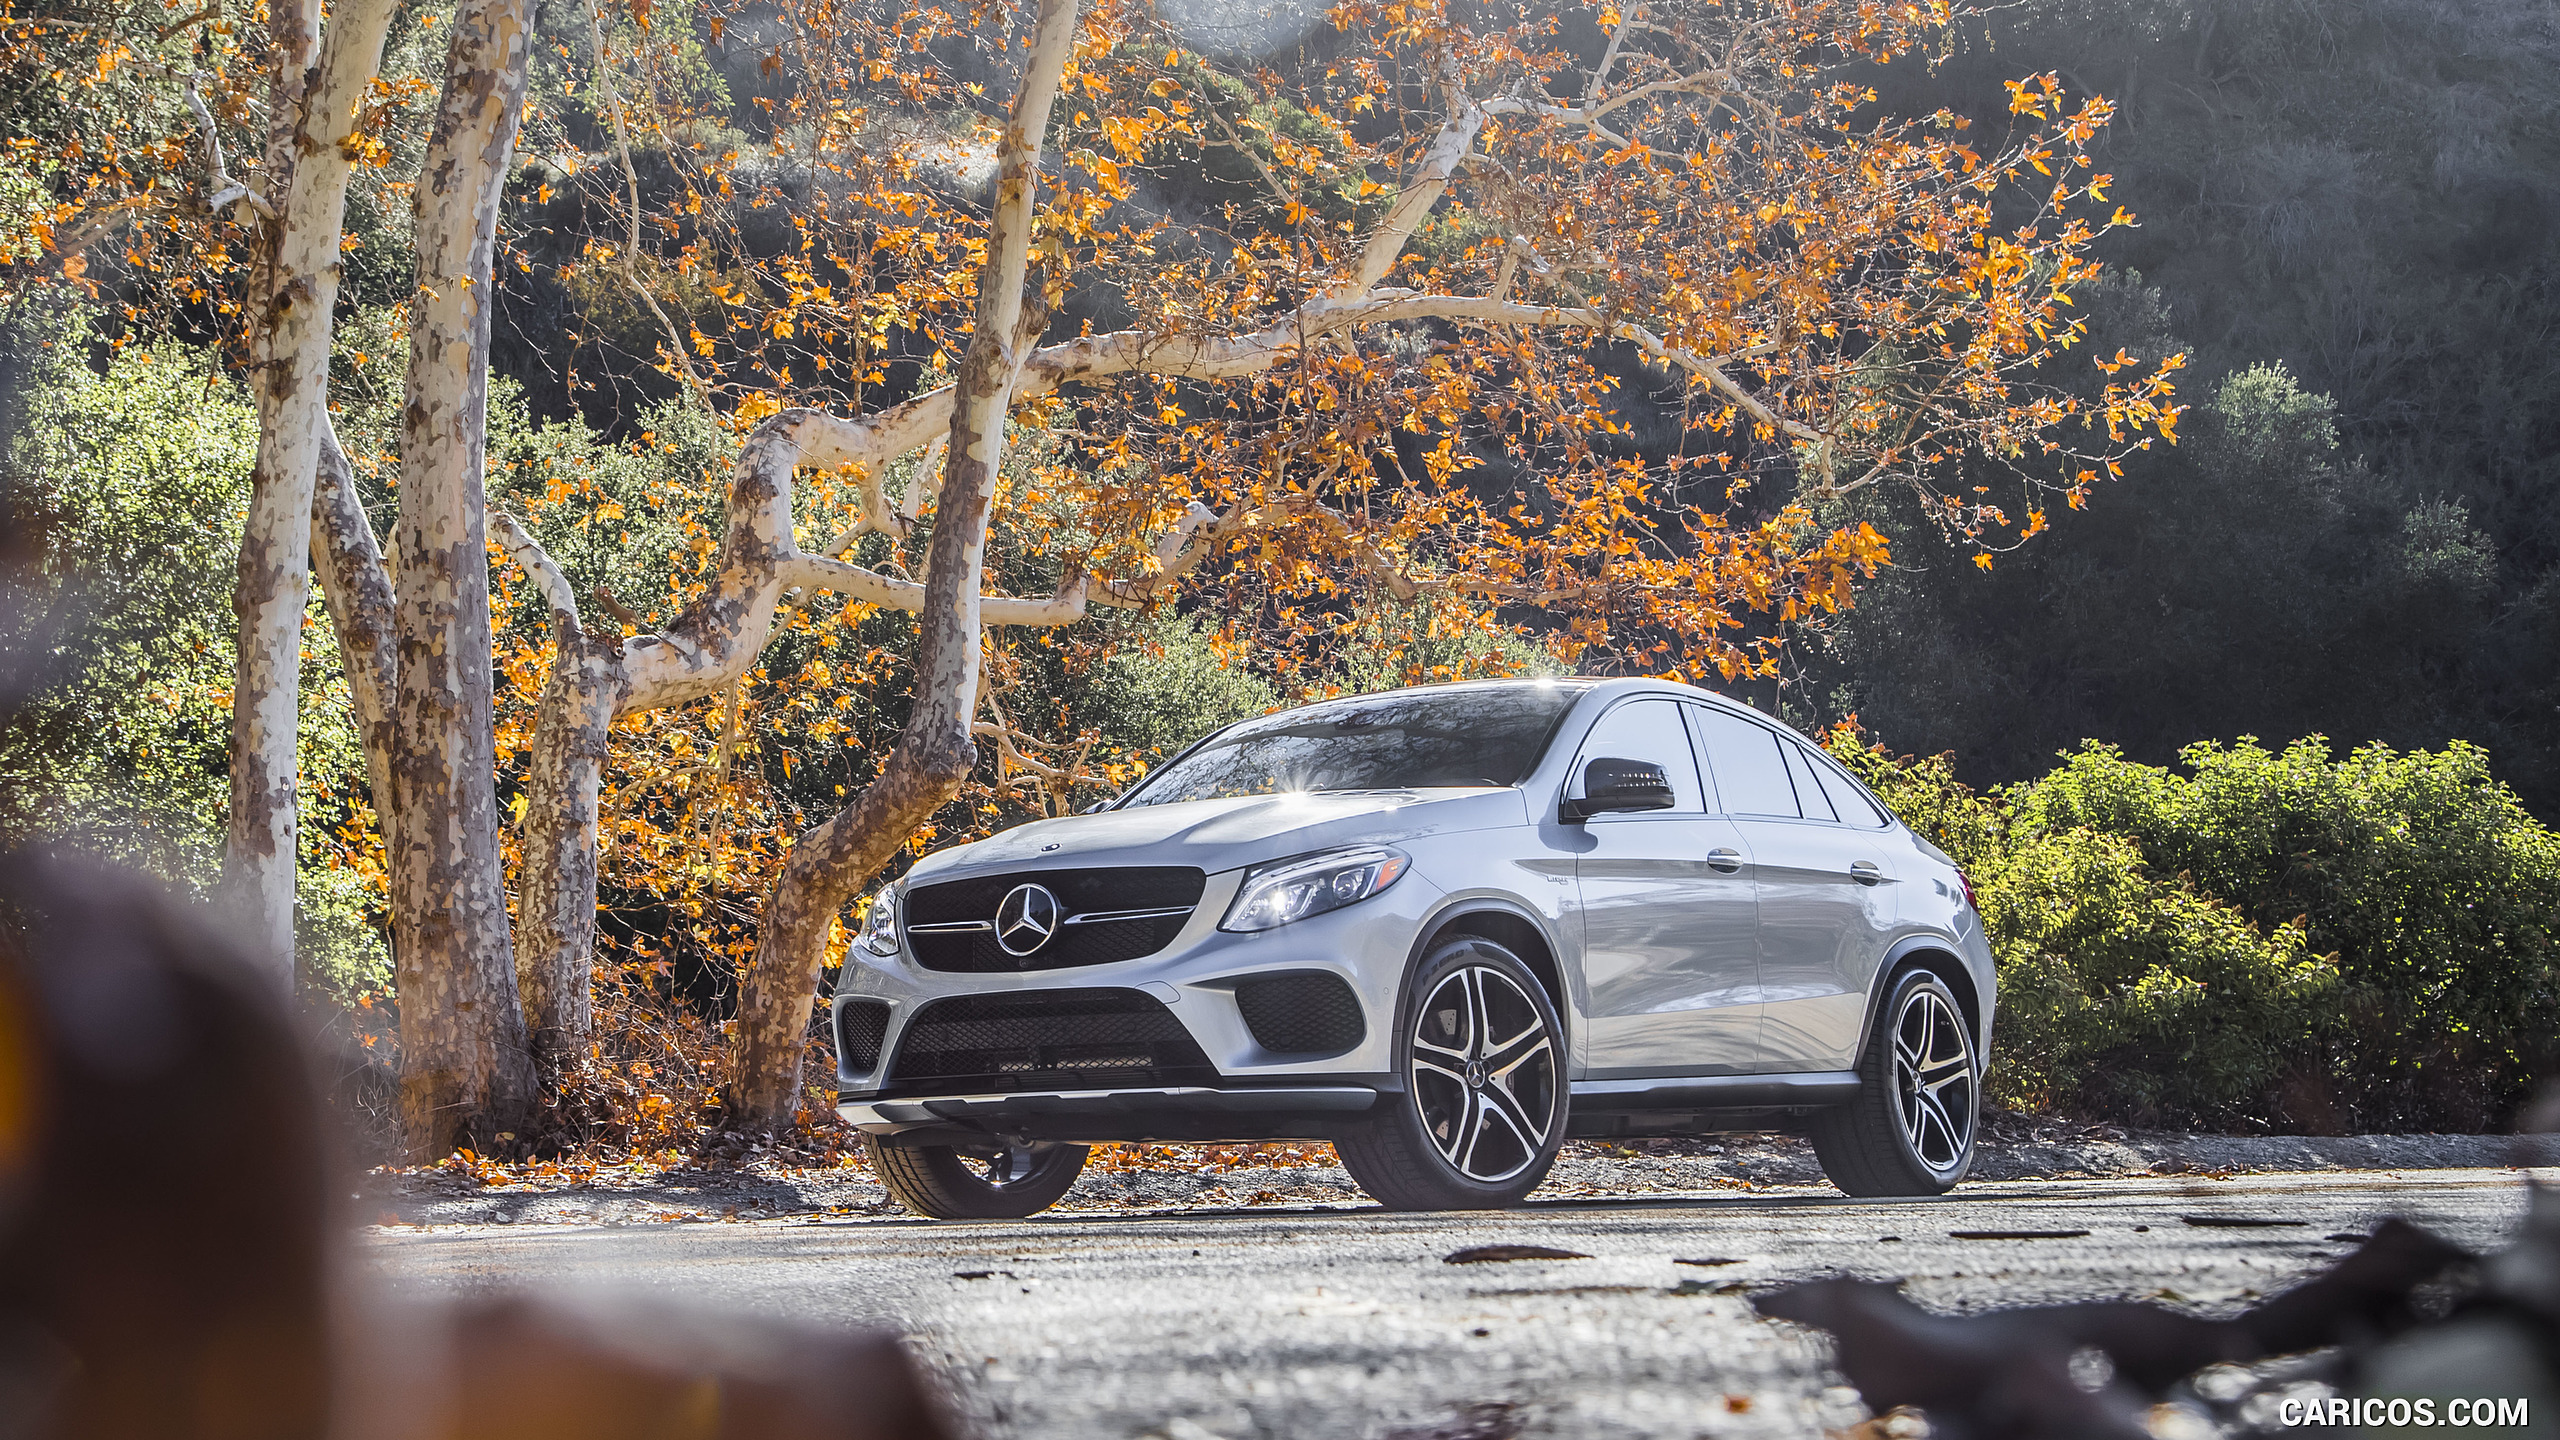 2017 Mercedes-AMG GLE 43 Coupe (US-Spec) - Front Three-Quarter, #12 of 29